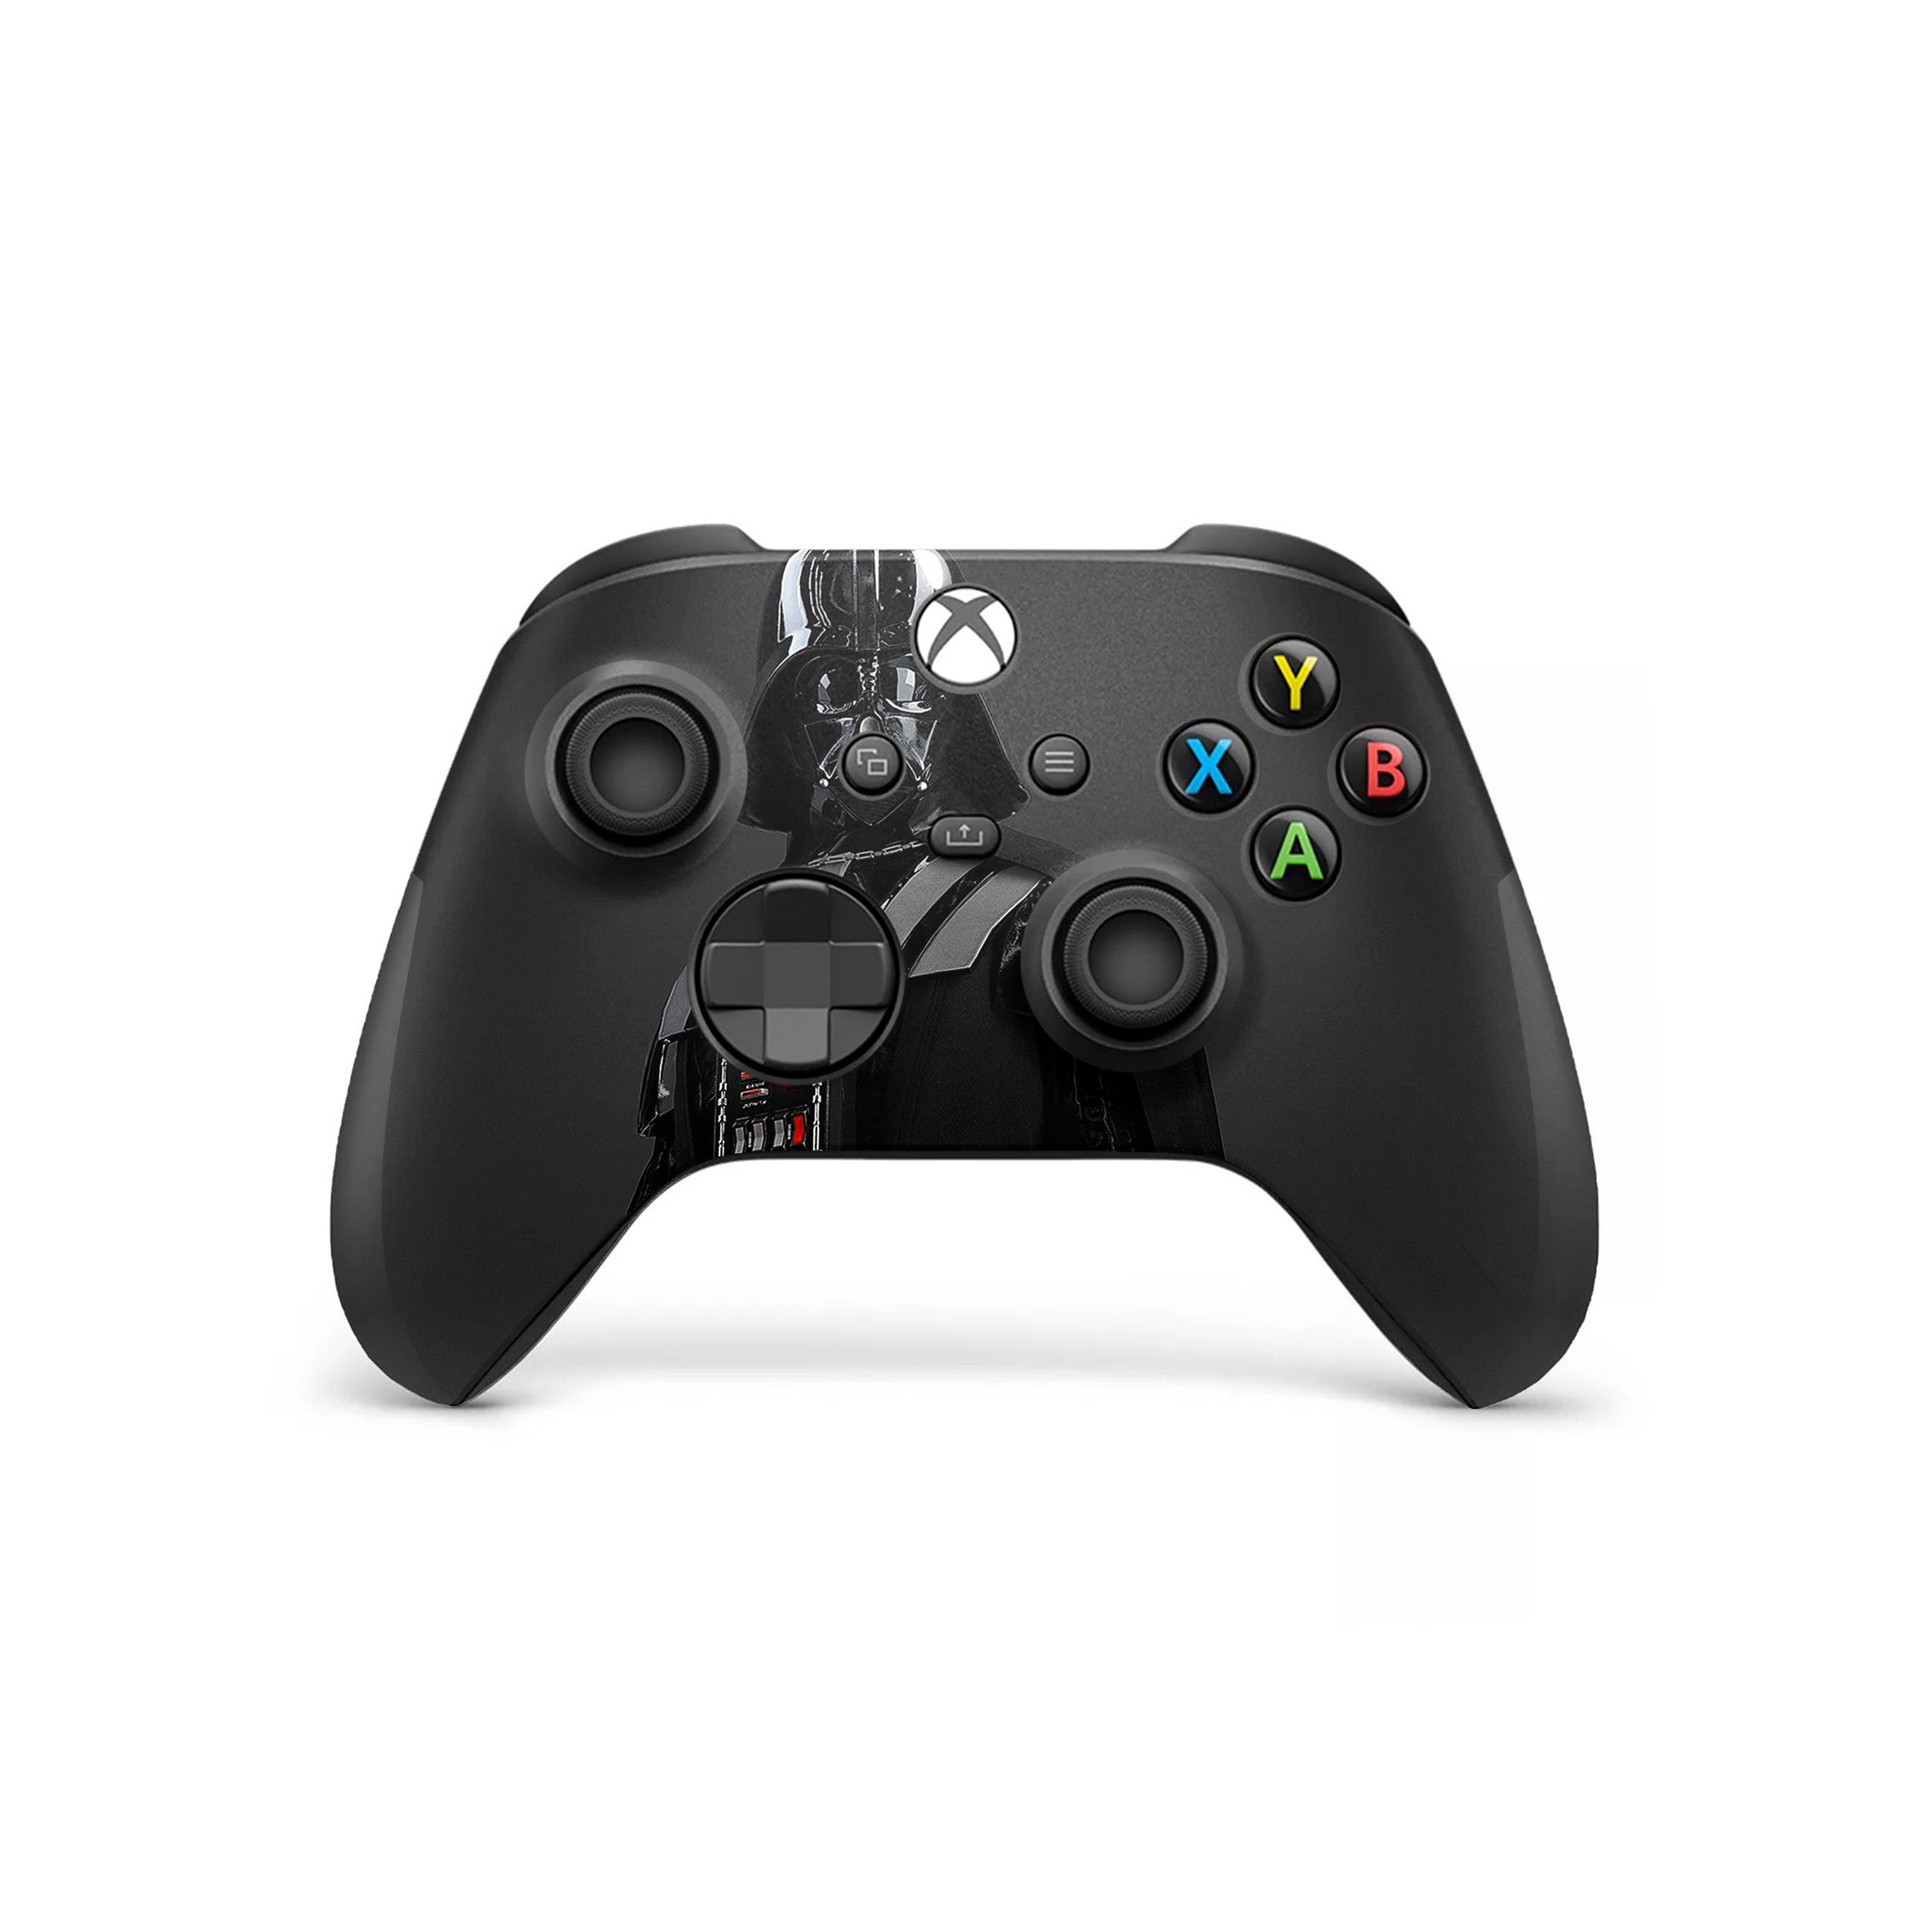 A video game skin featuring a Star Wars Darth Vader design for the Xbox Wireless Controller.